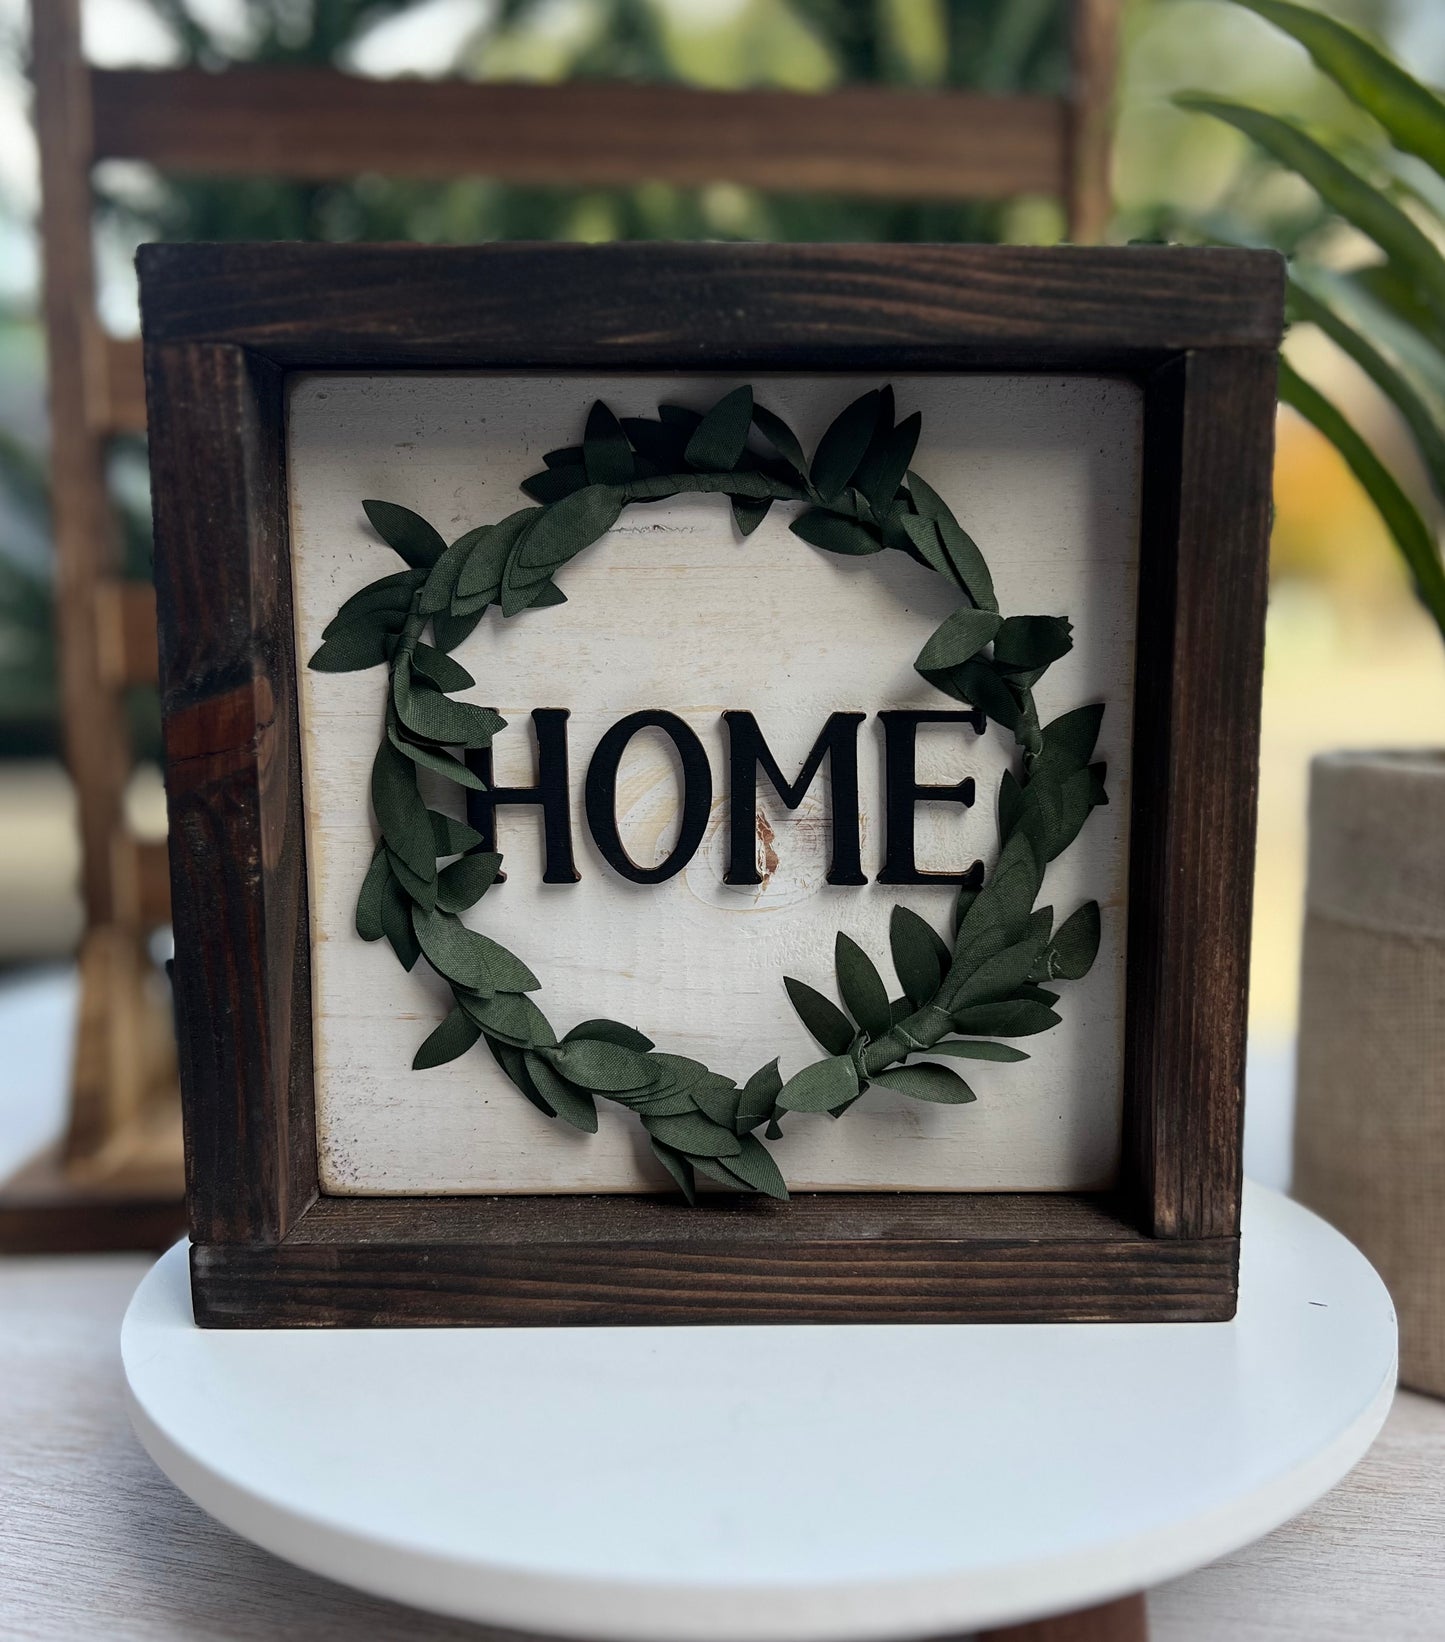 Home sign with mini wreath